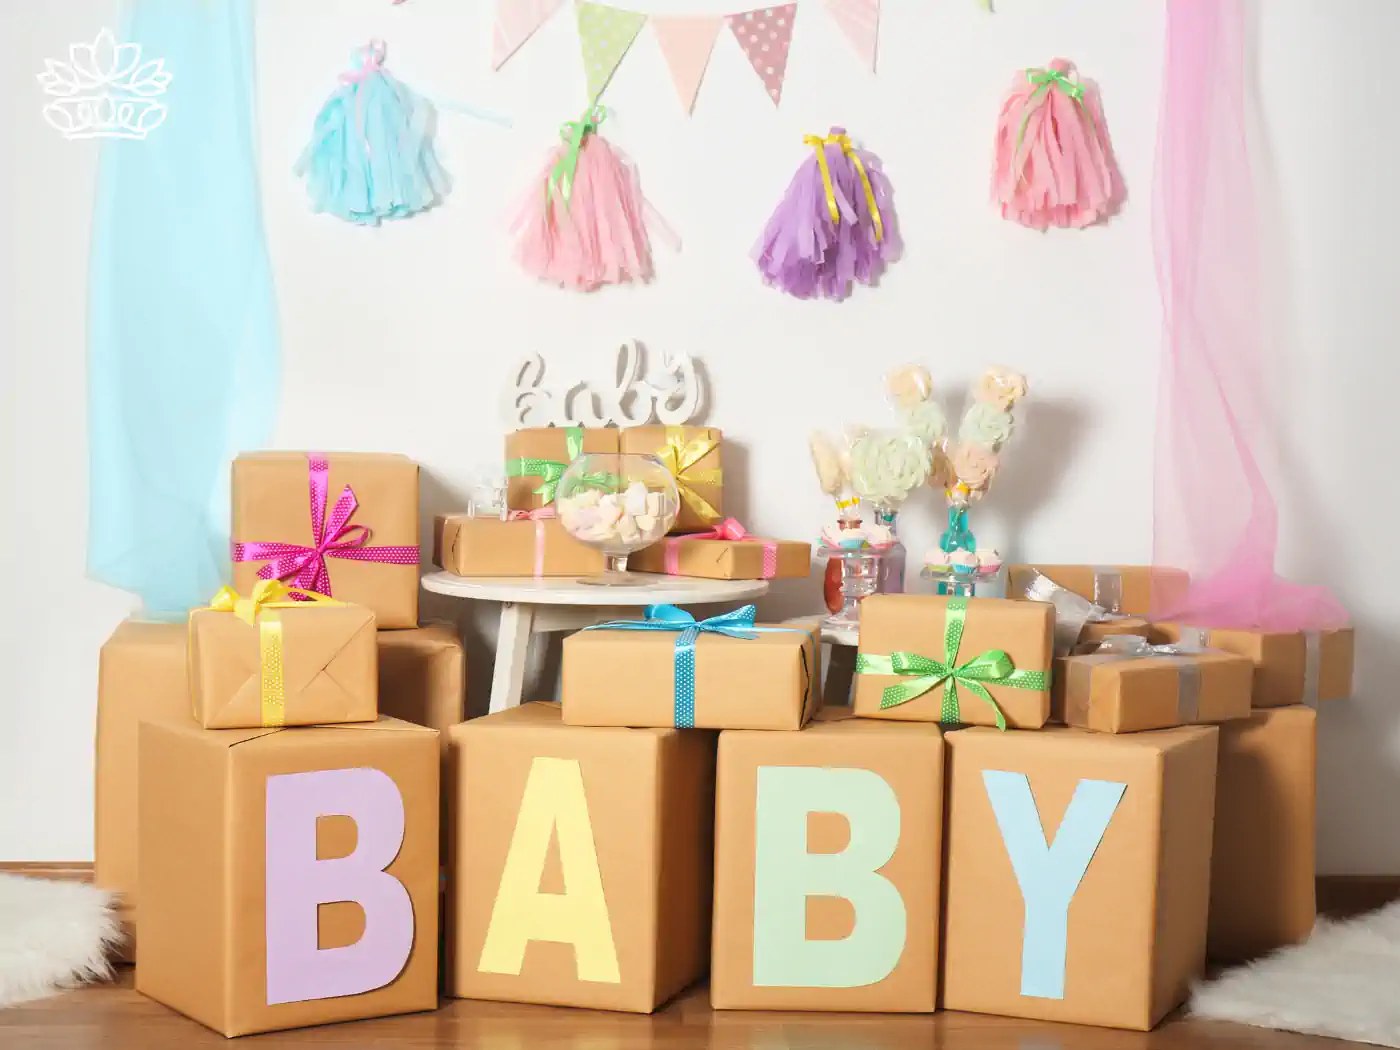 Baby Shower Gift Boxes Collection with Colourful Decorations and Fabulous Flowers and Gifts - Ideal for Celebrating New Babies.